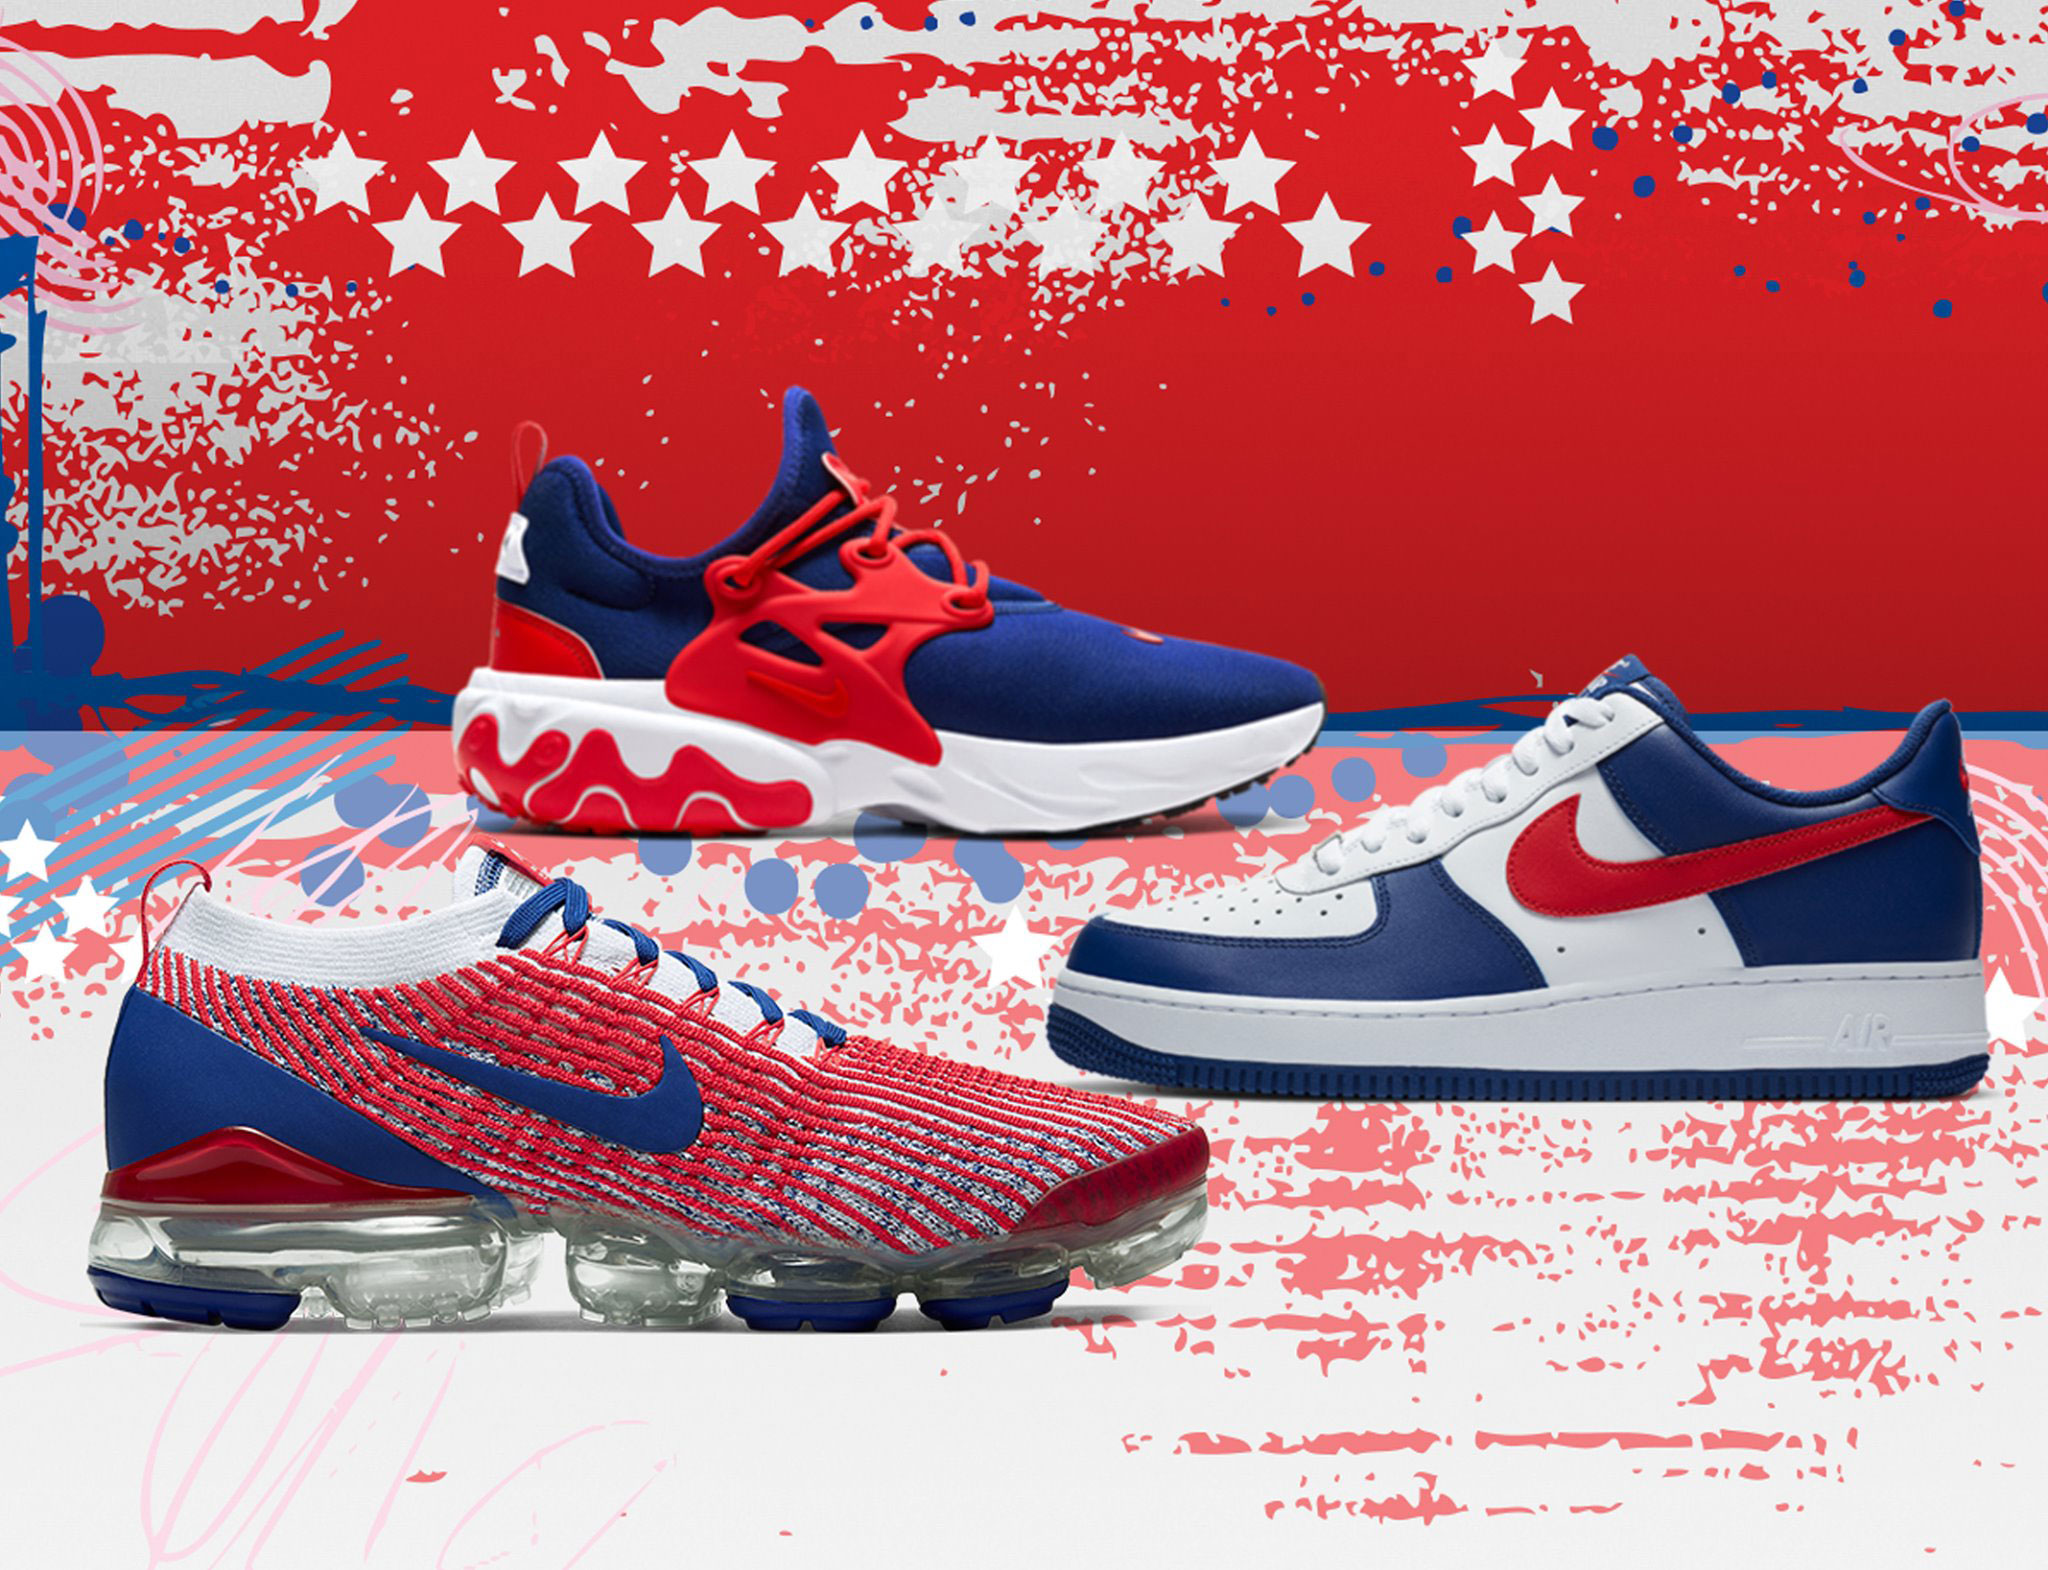 Nike Americana Sneakers and Apparel for 